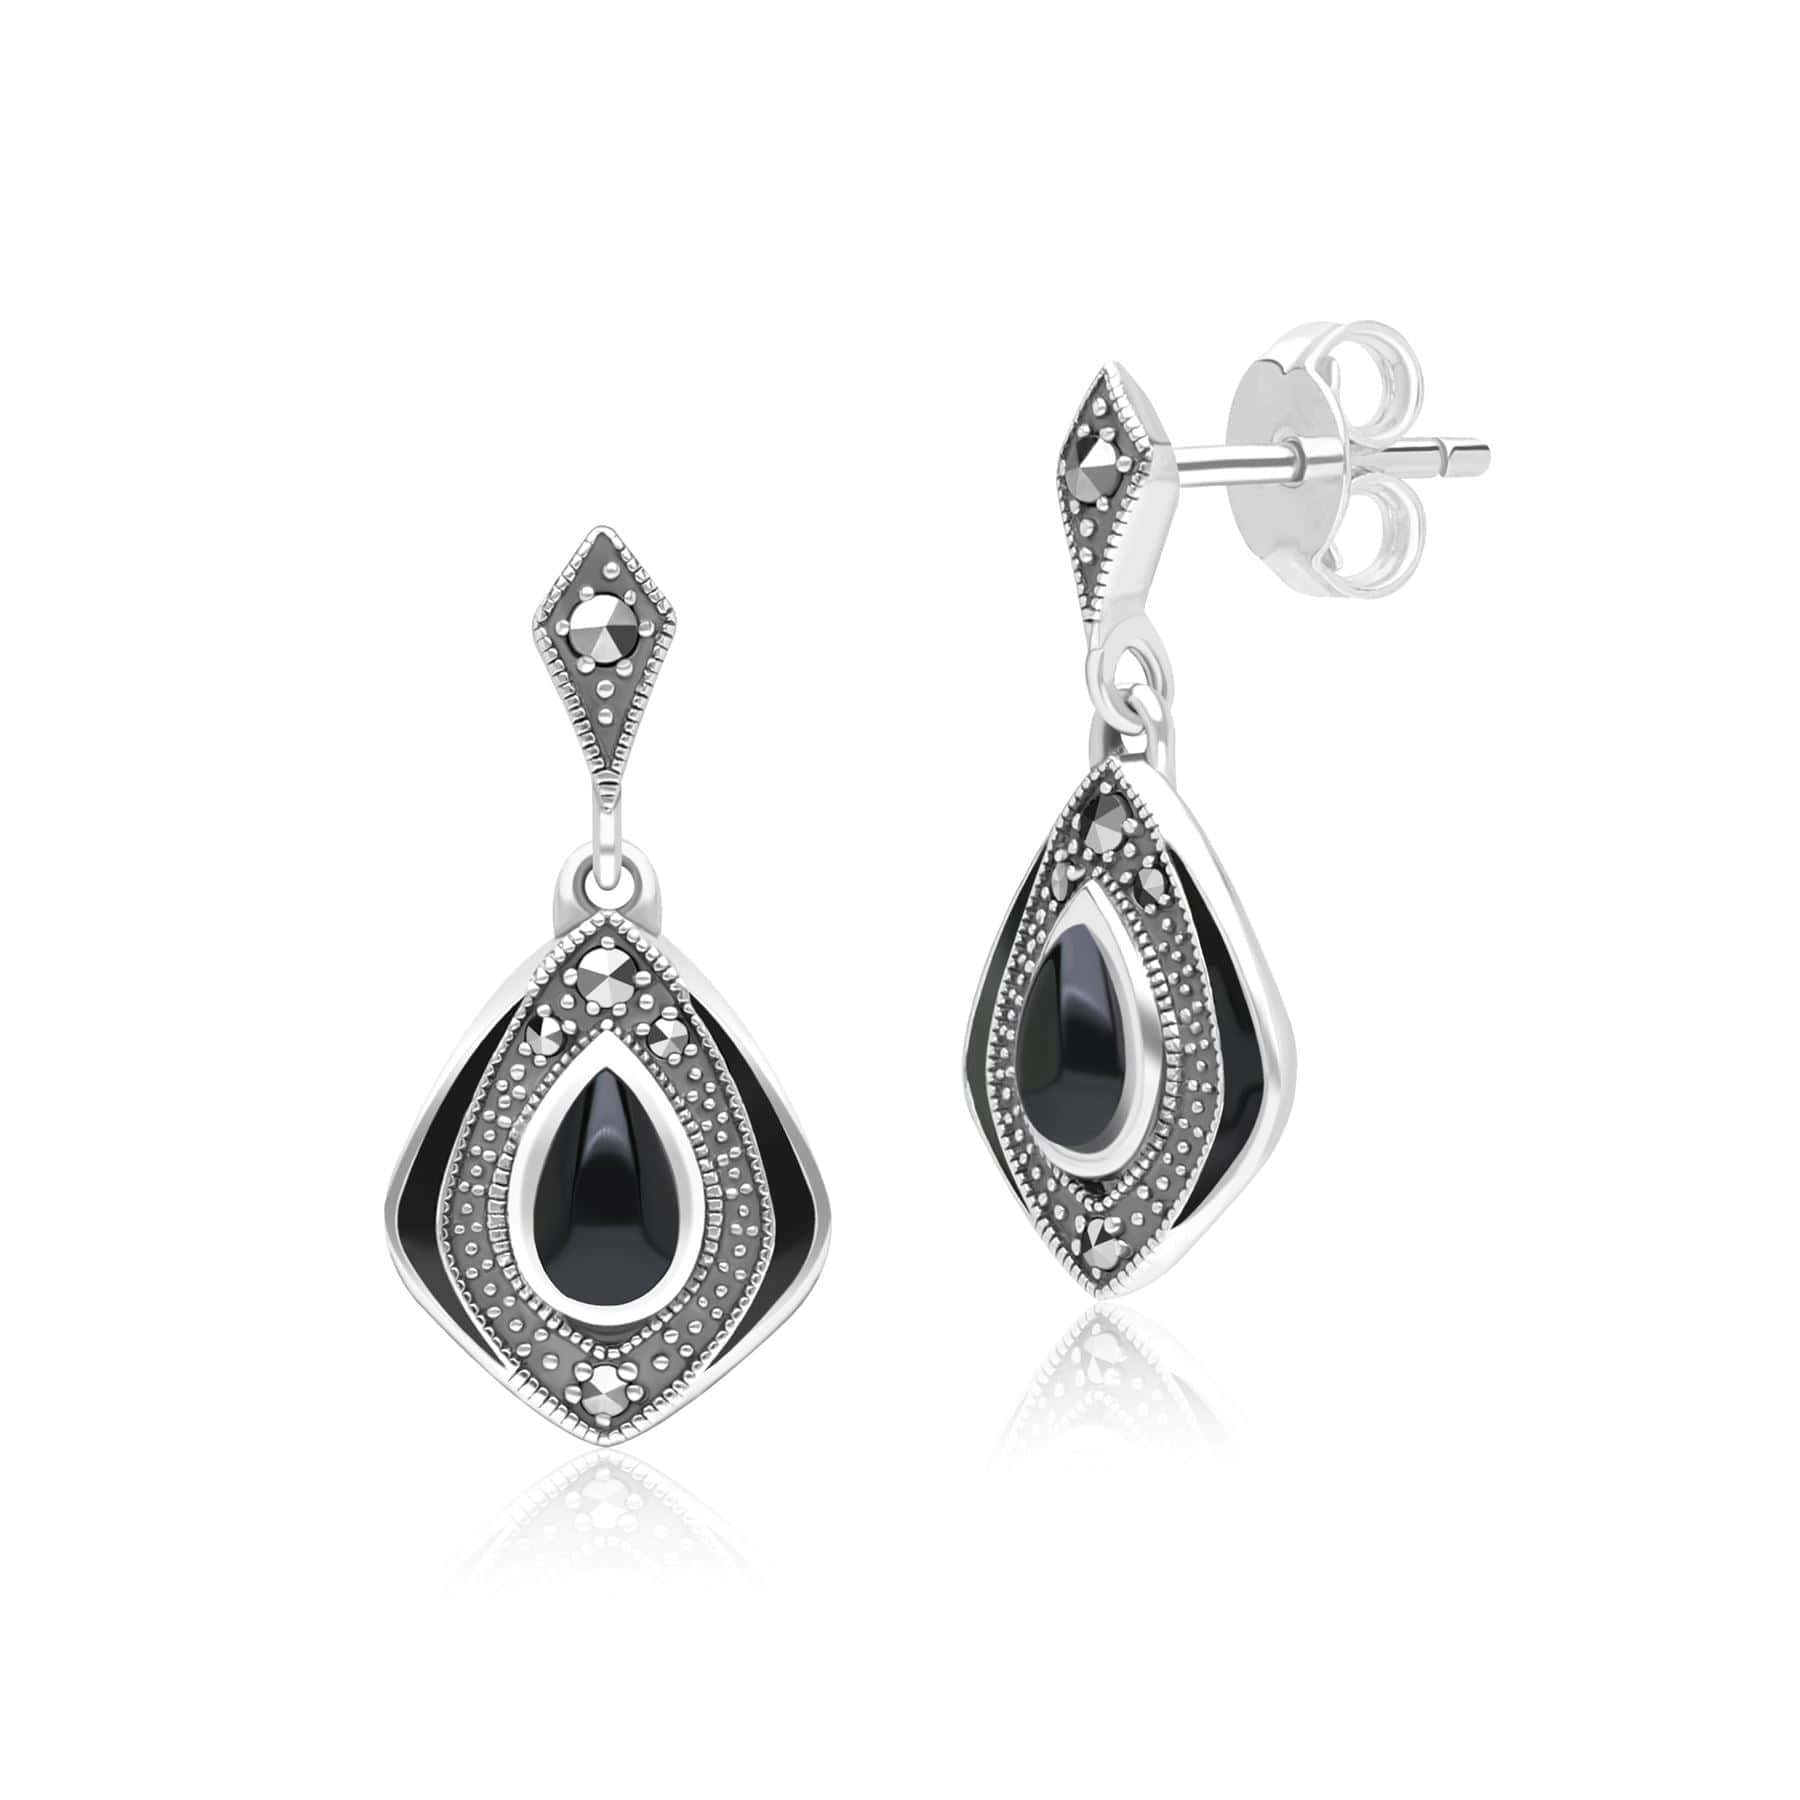 Art Deco Style Kite Onyx and Marcasite Drop Earrings in Sterling Silver 214E936201925 